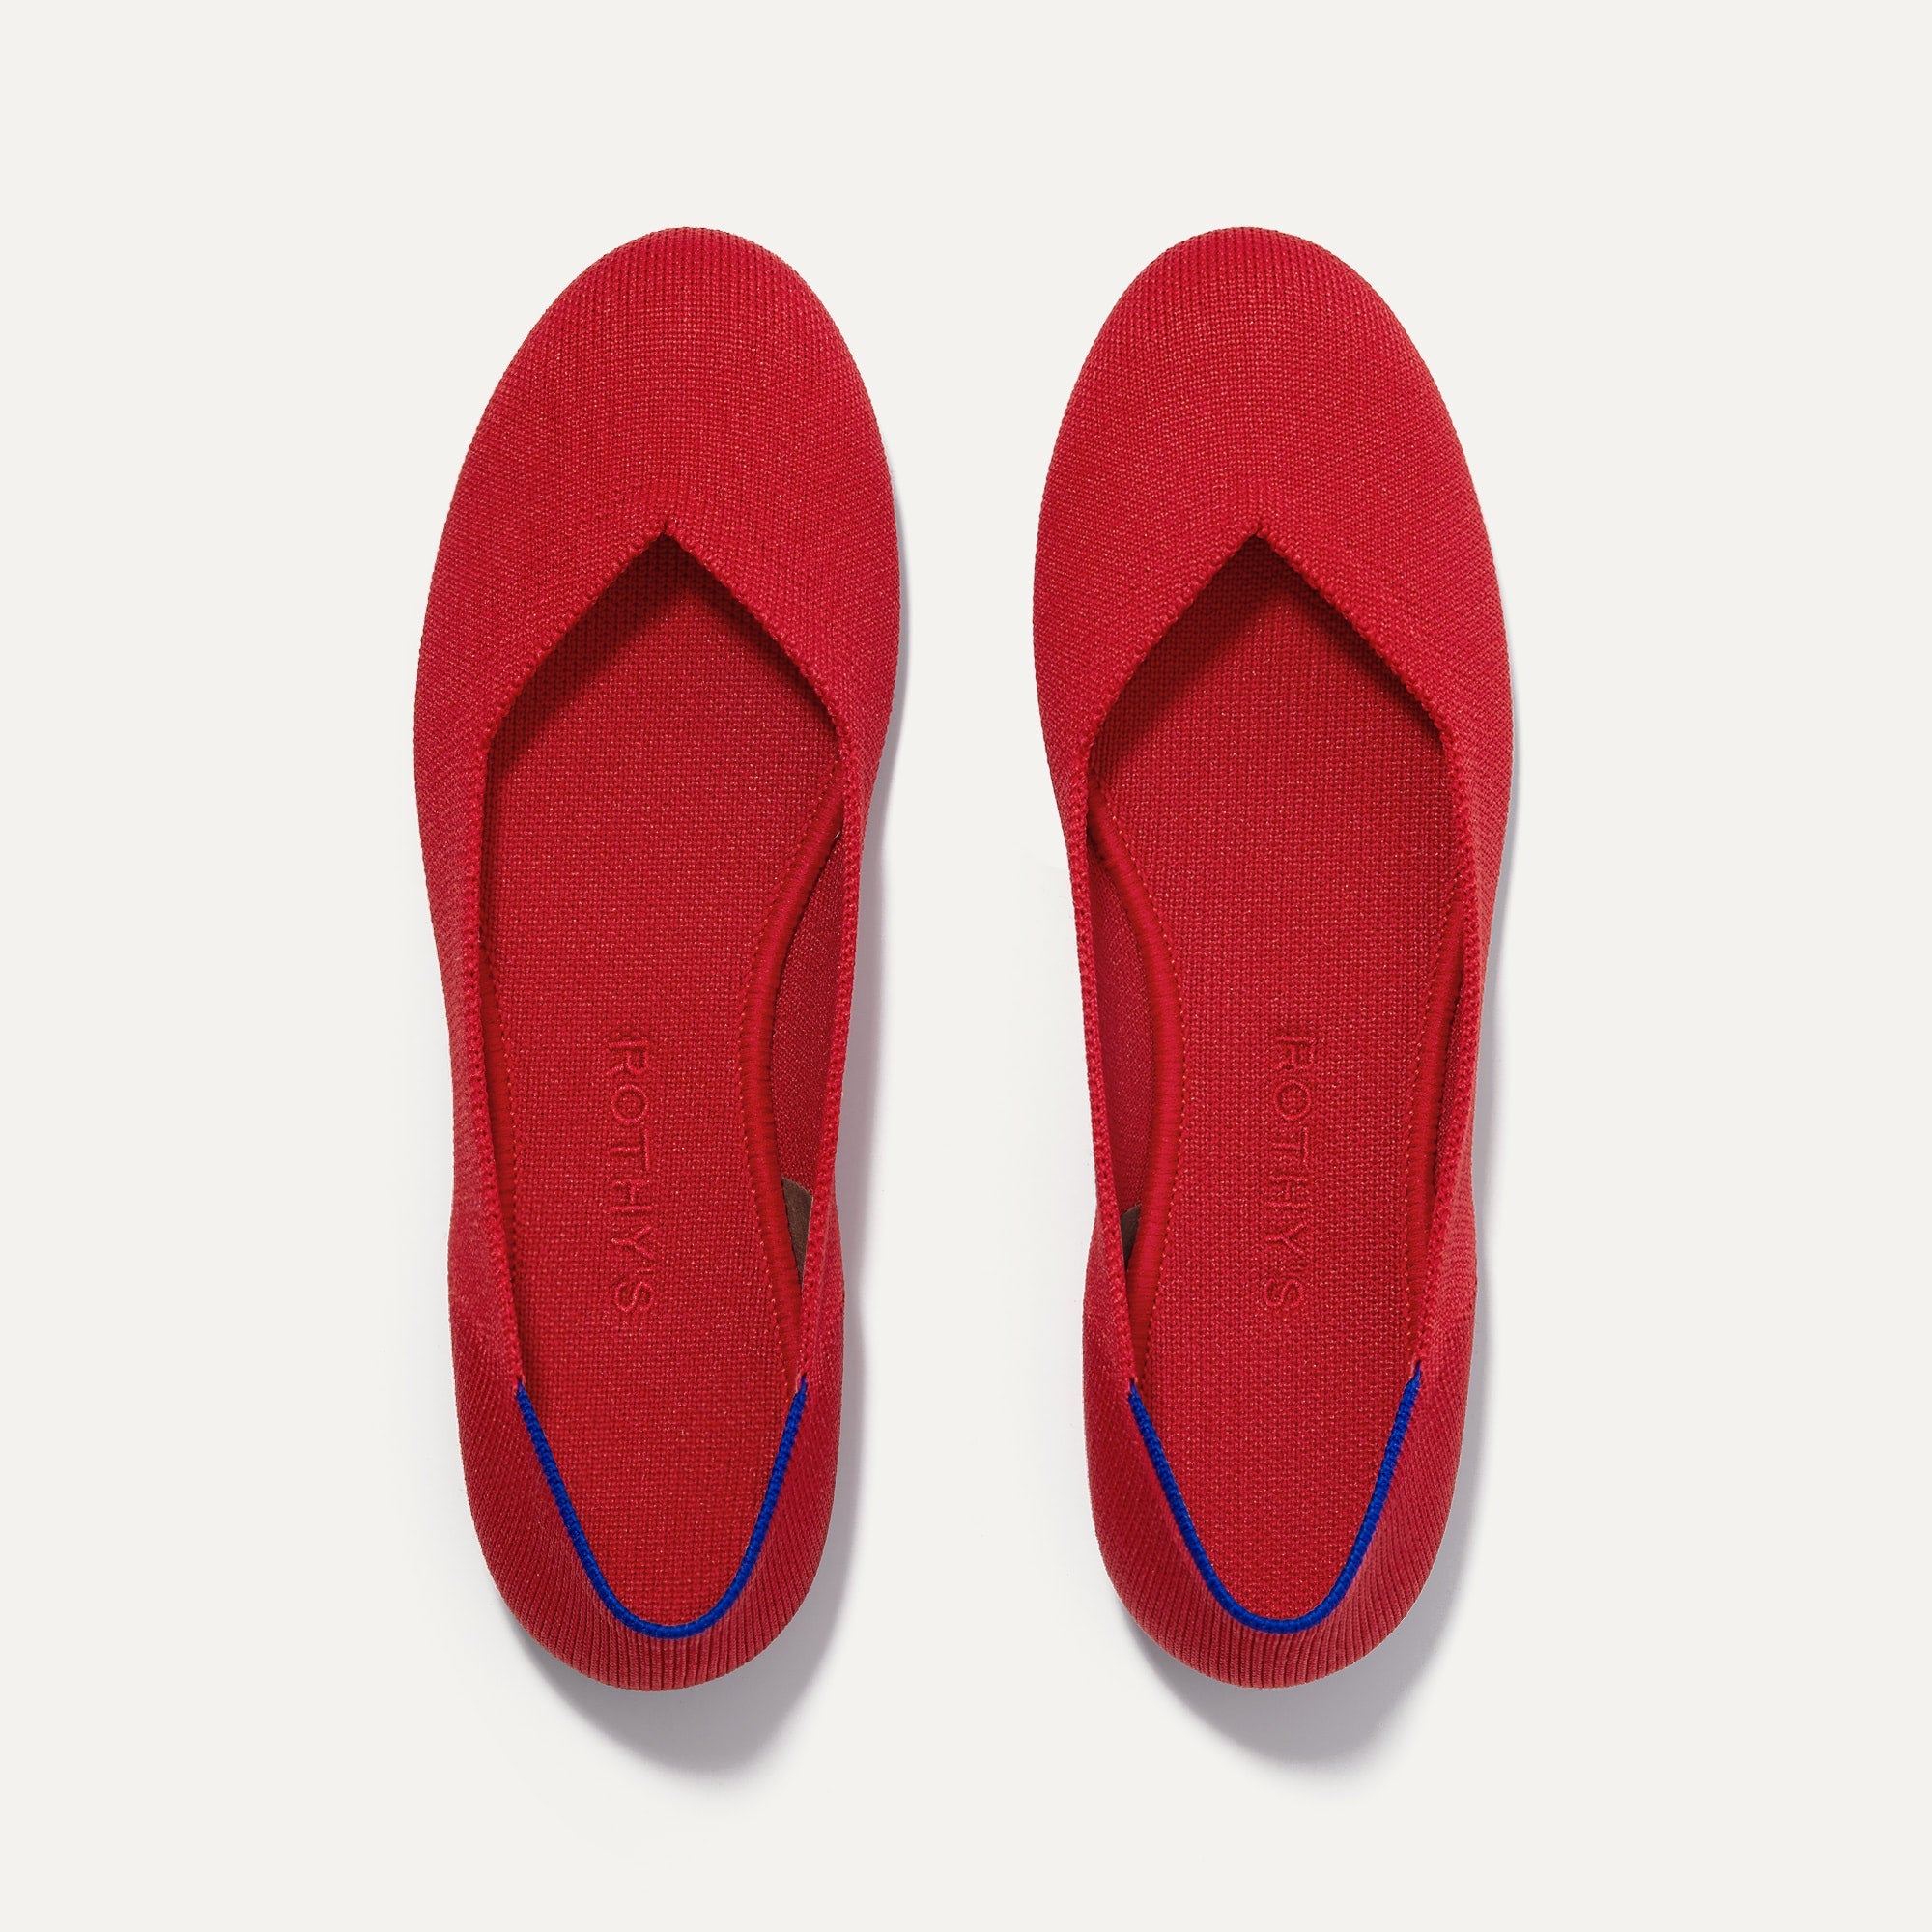 The Flat in Bright Red | Women’s Flats | Rothy's